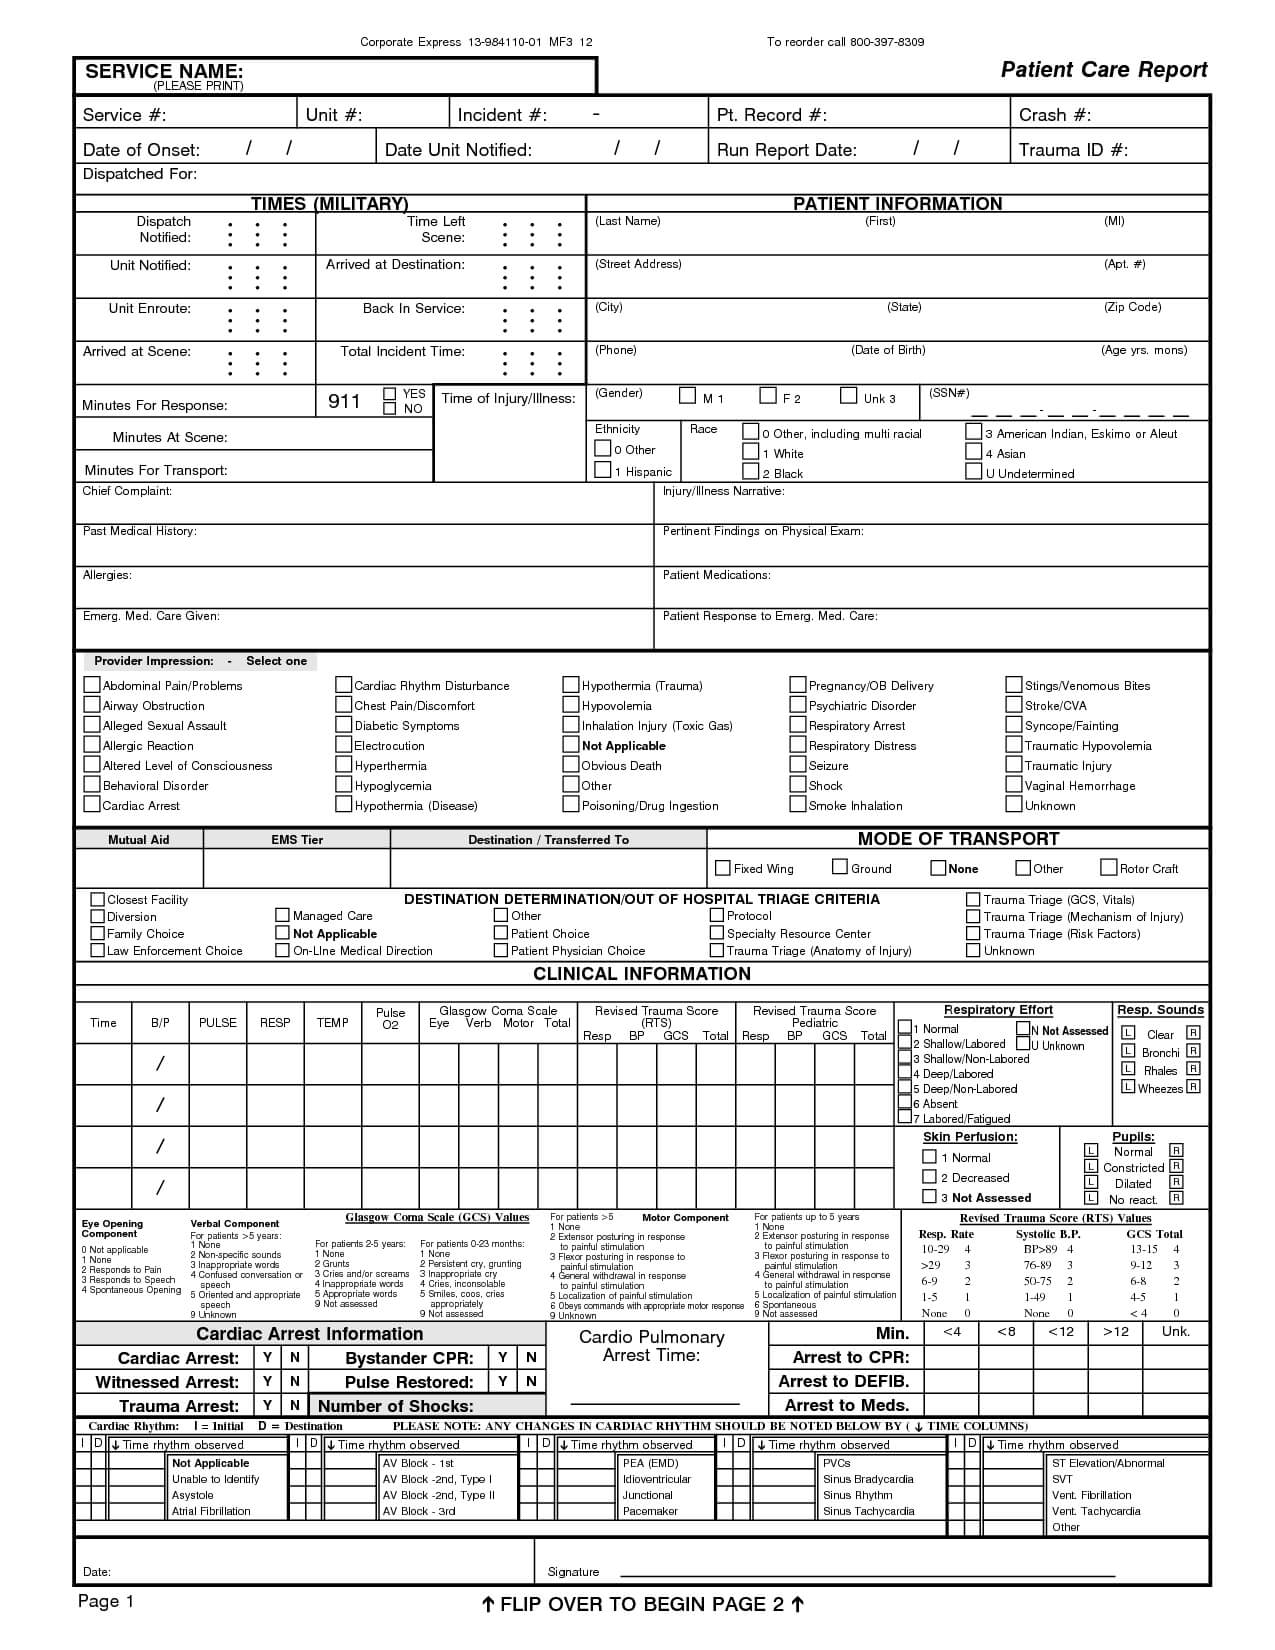 Patient Care Report Template Word Emt Example Ems Narrative Within Patient Care Report Template